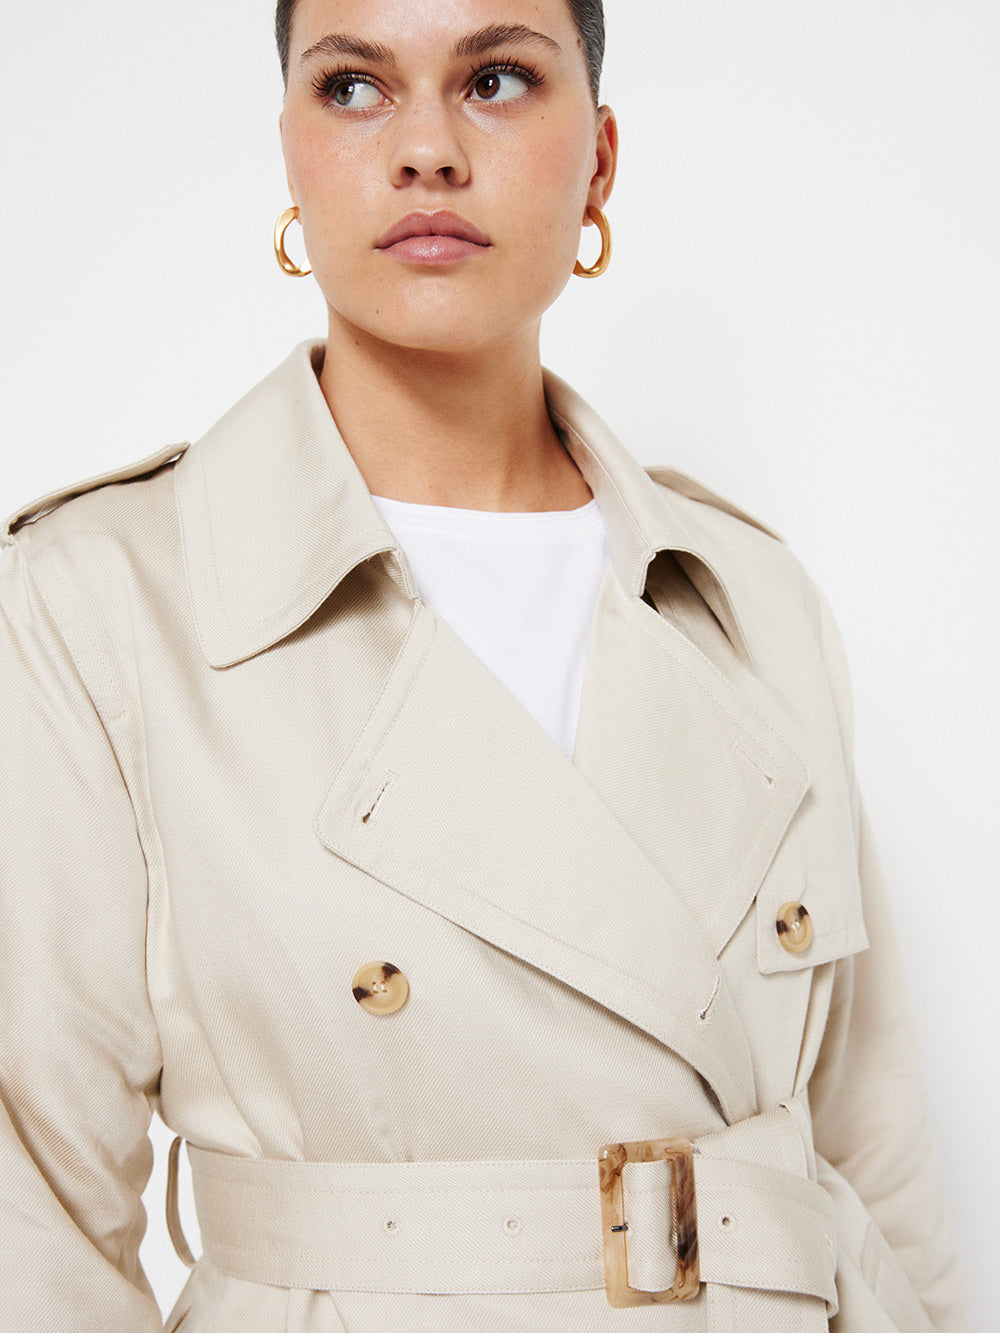 The Soft Twill Trench